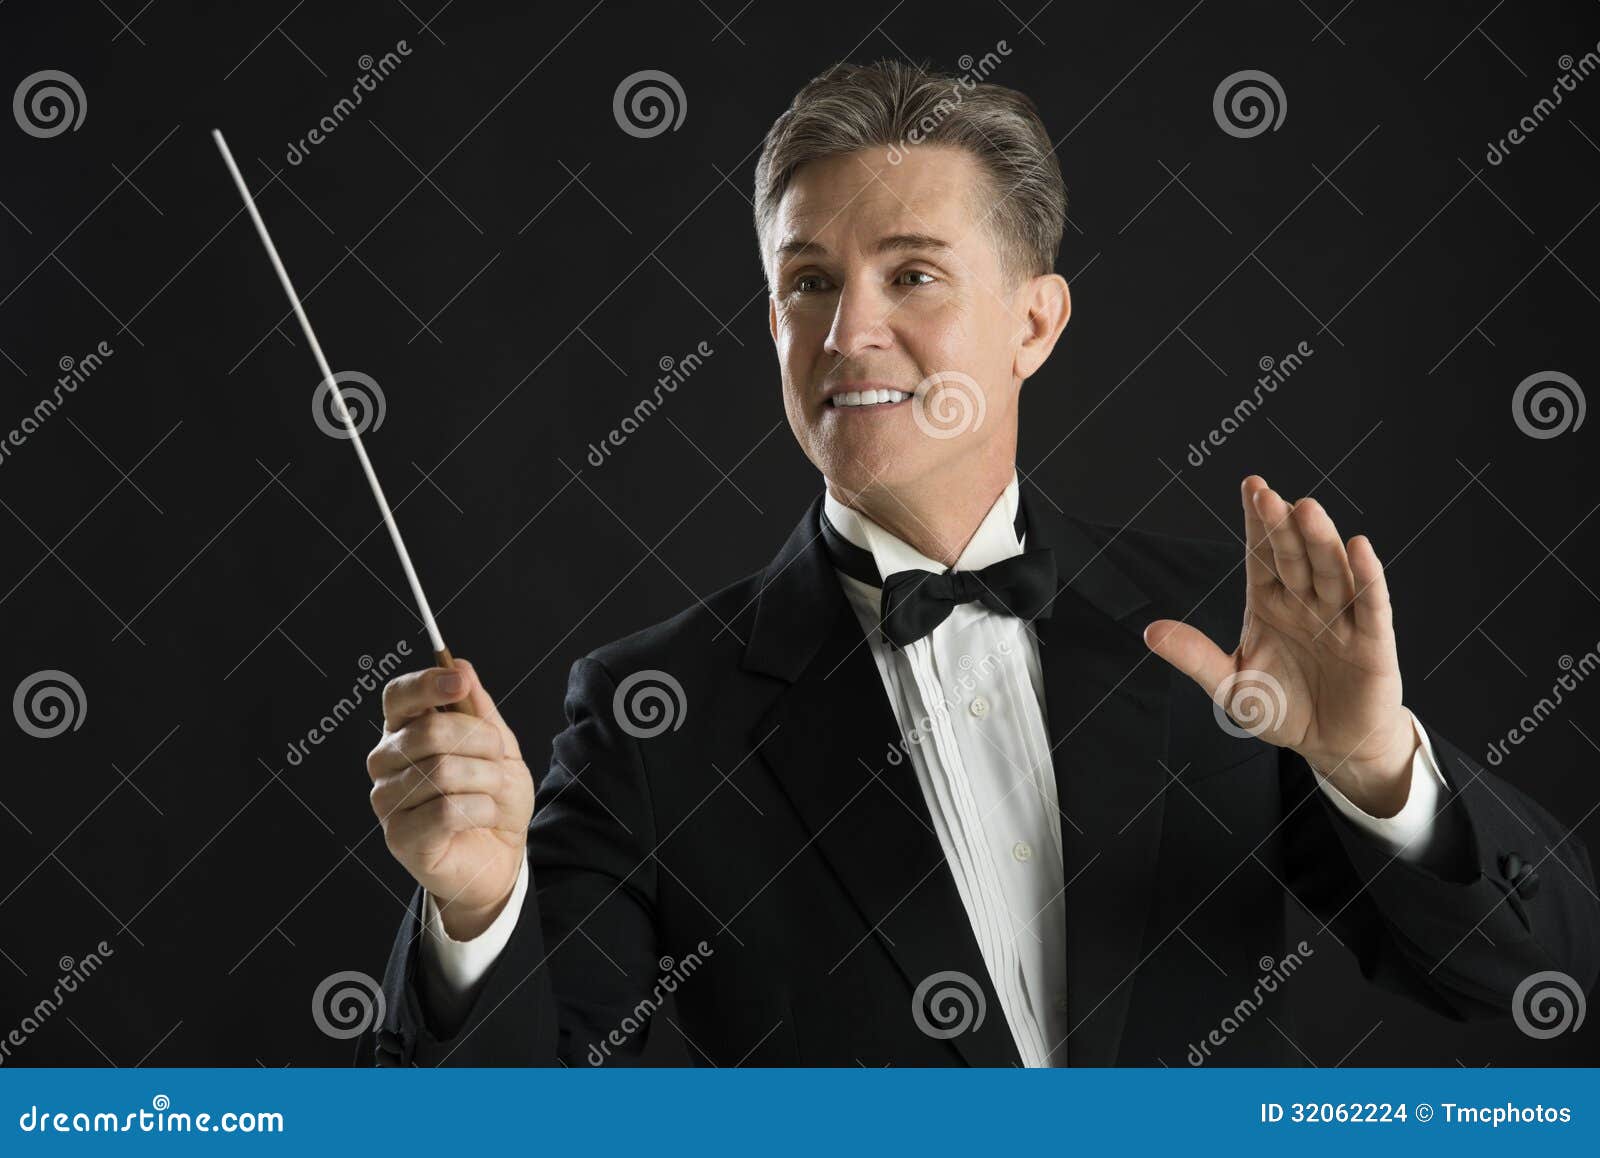 orchestra conductor looking away while directing with his baton